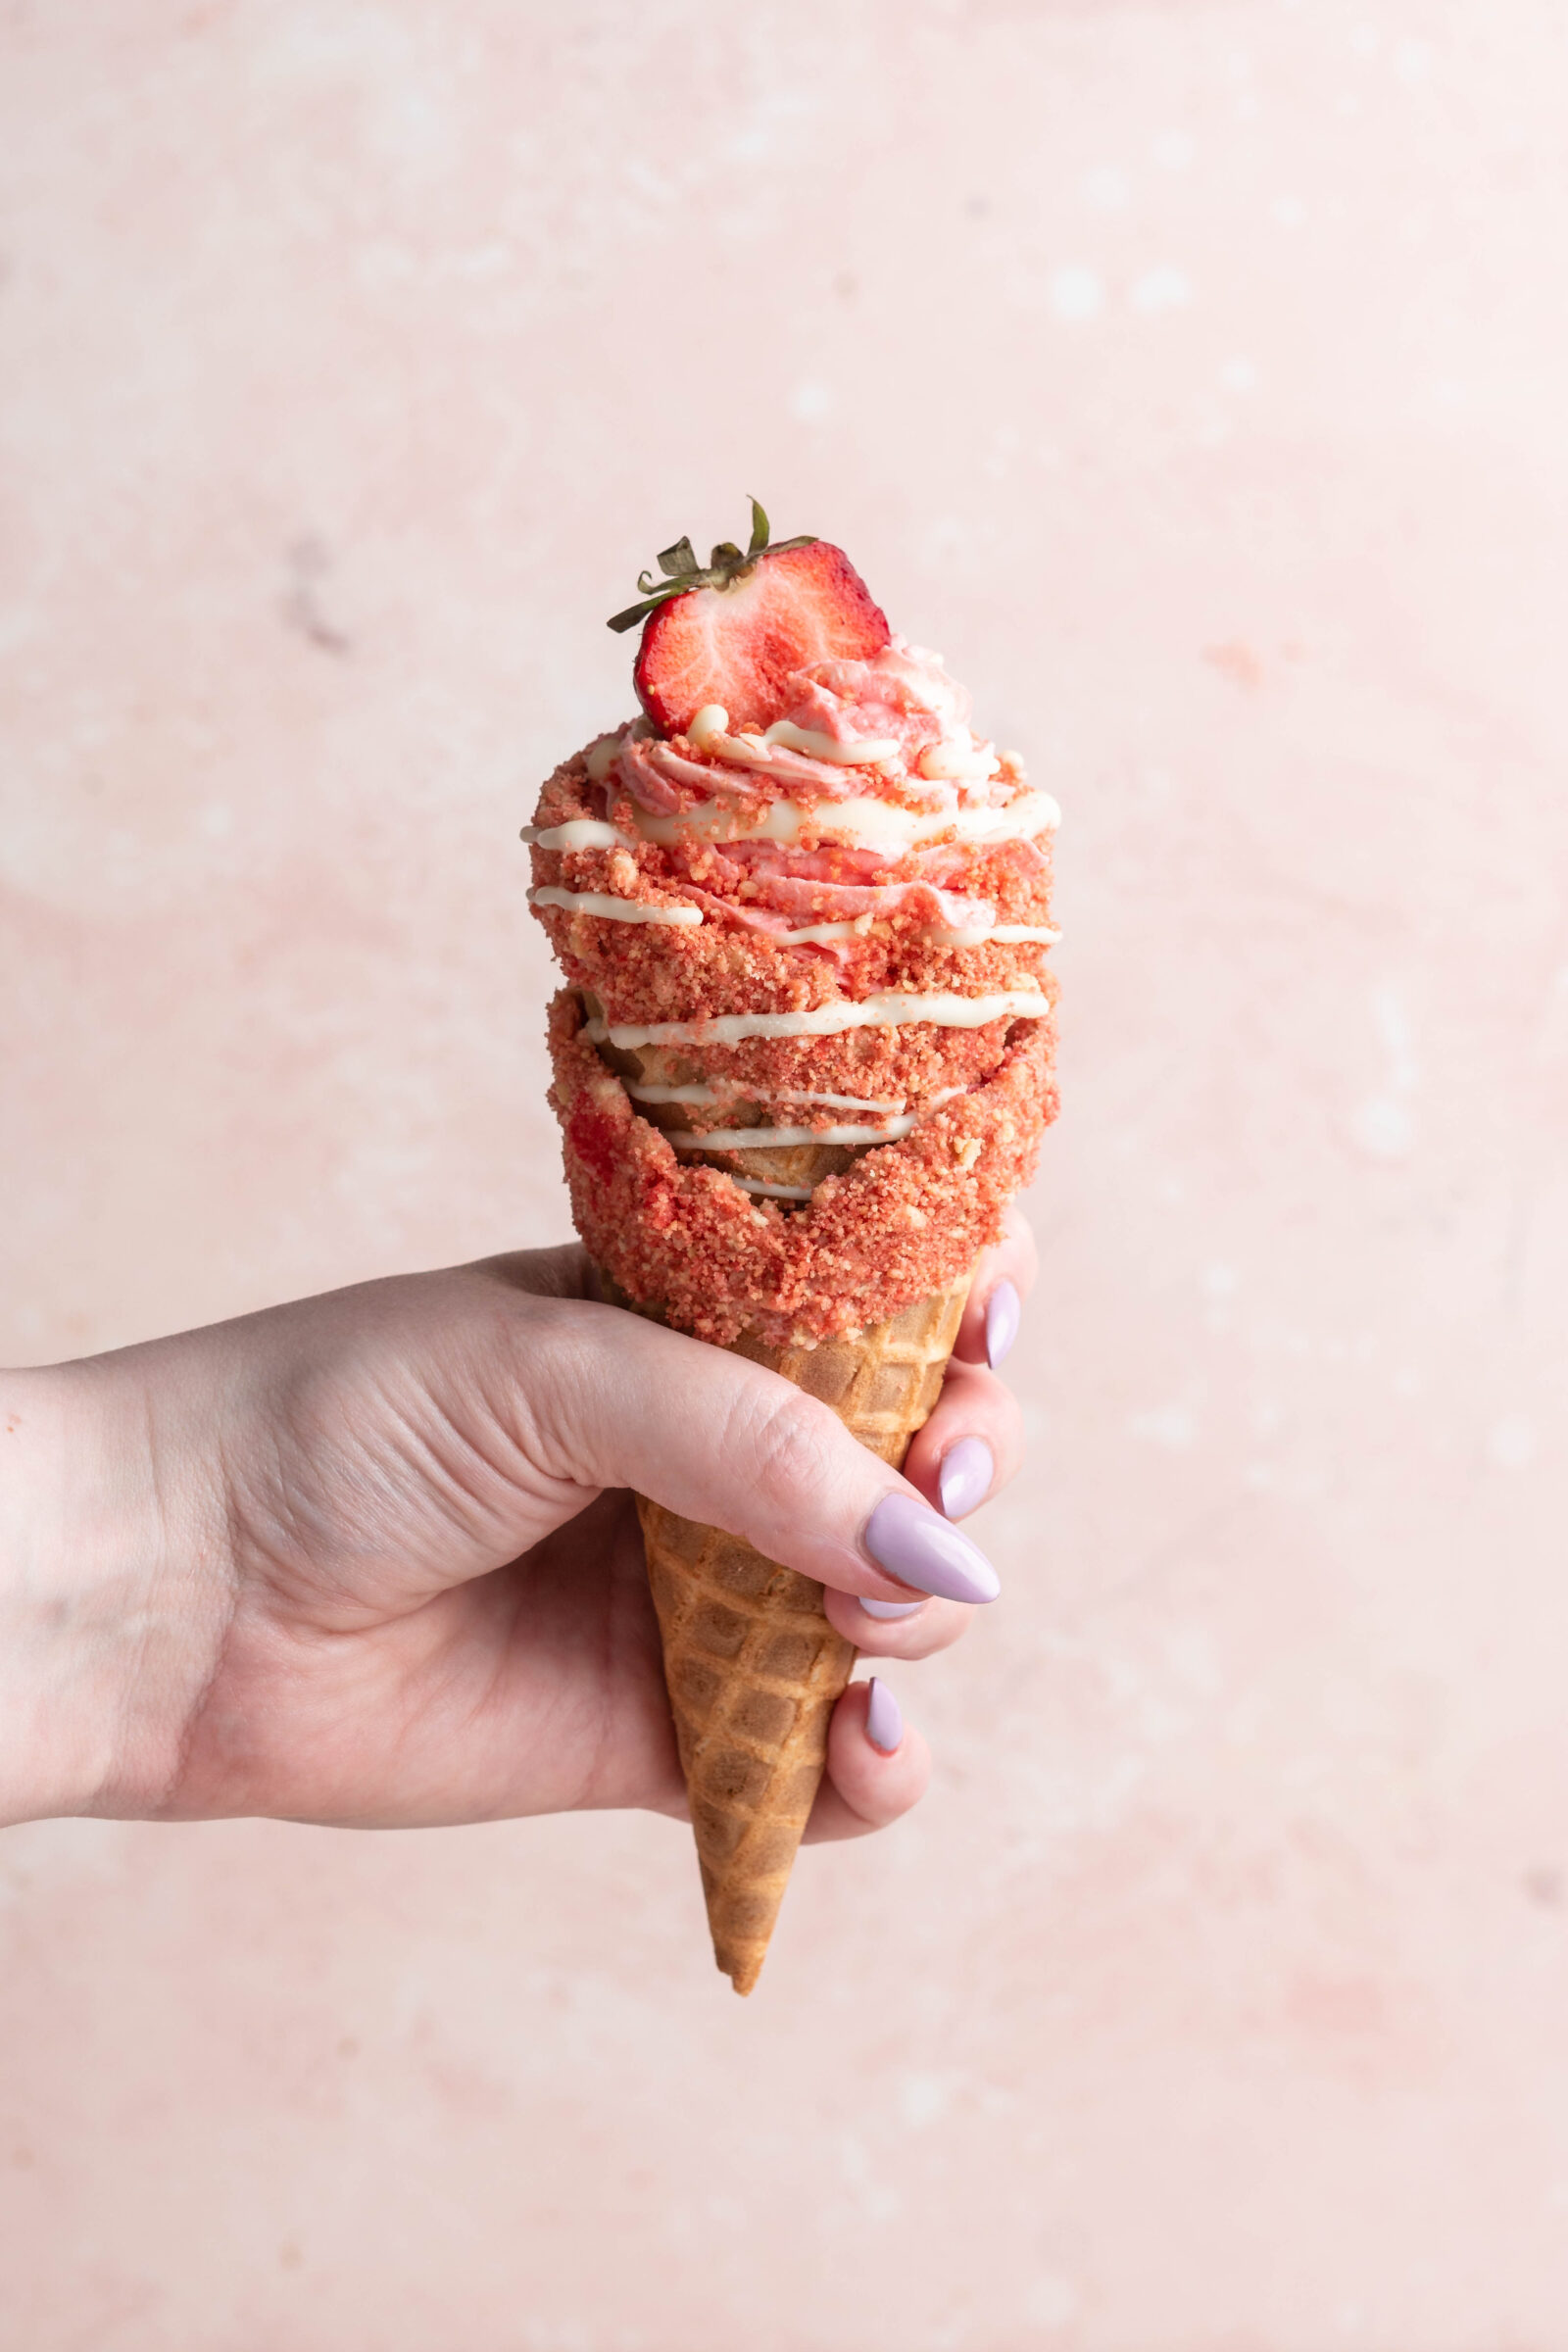 An Extra Large Ice Cream Cone Stock Photo - Image of strawberry